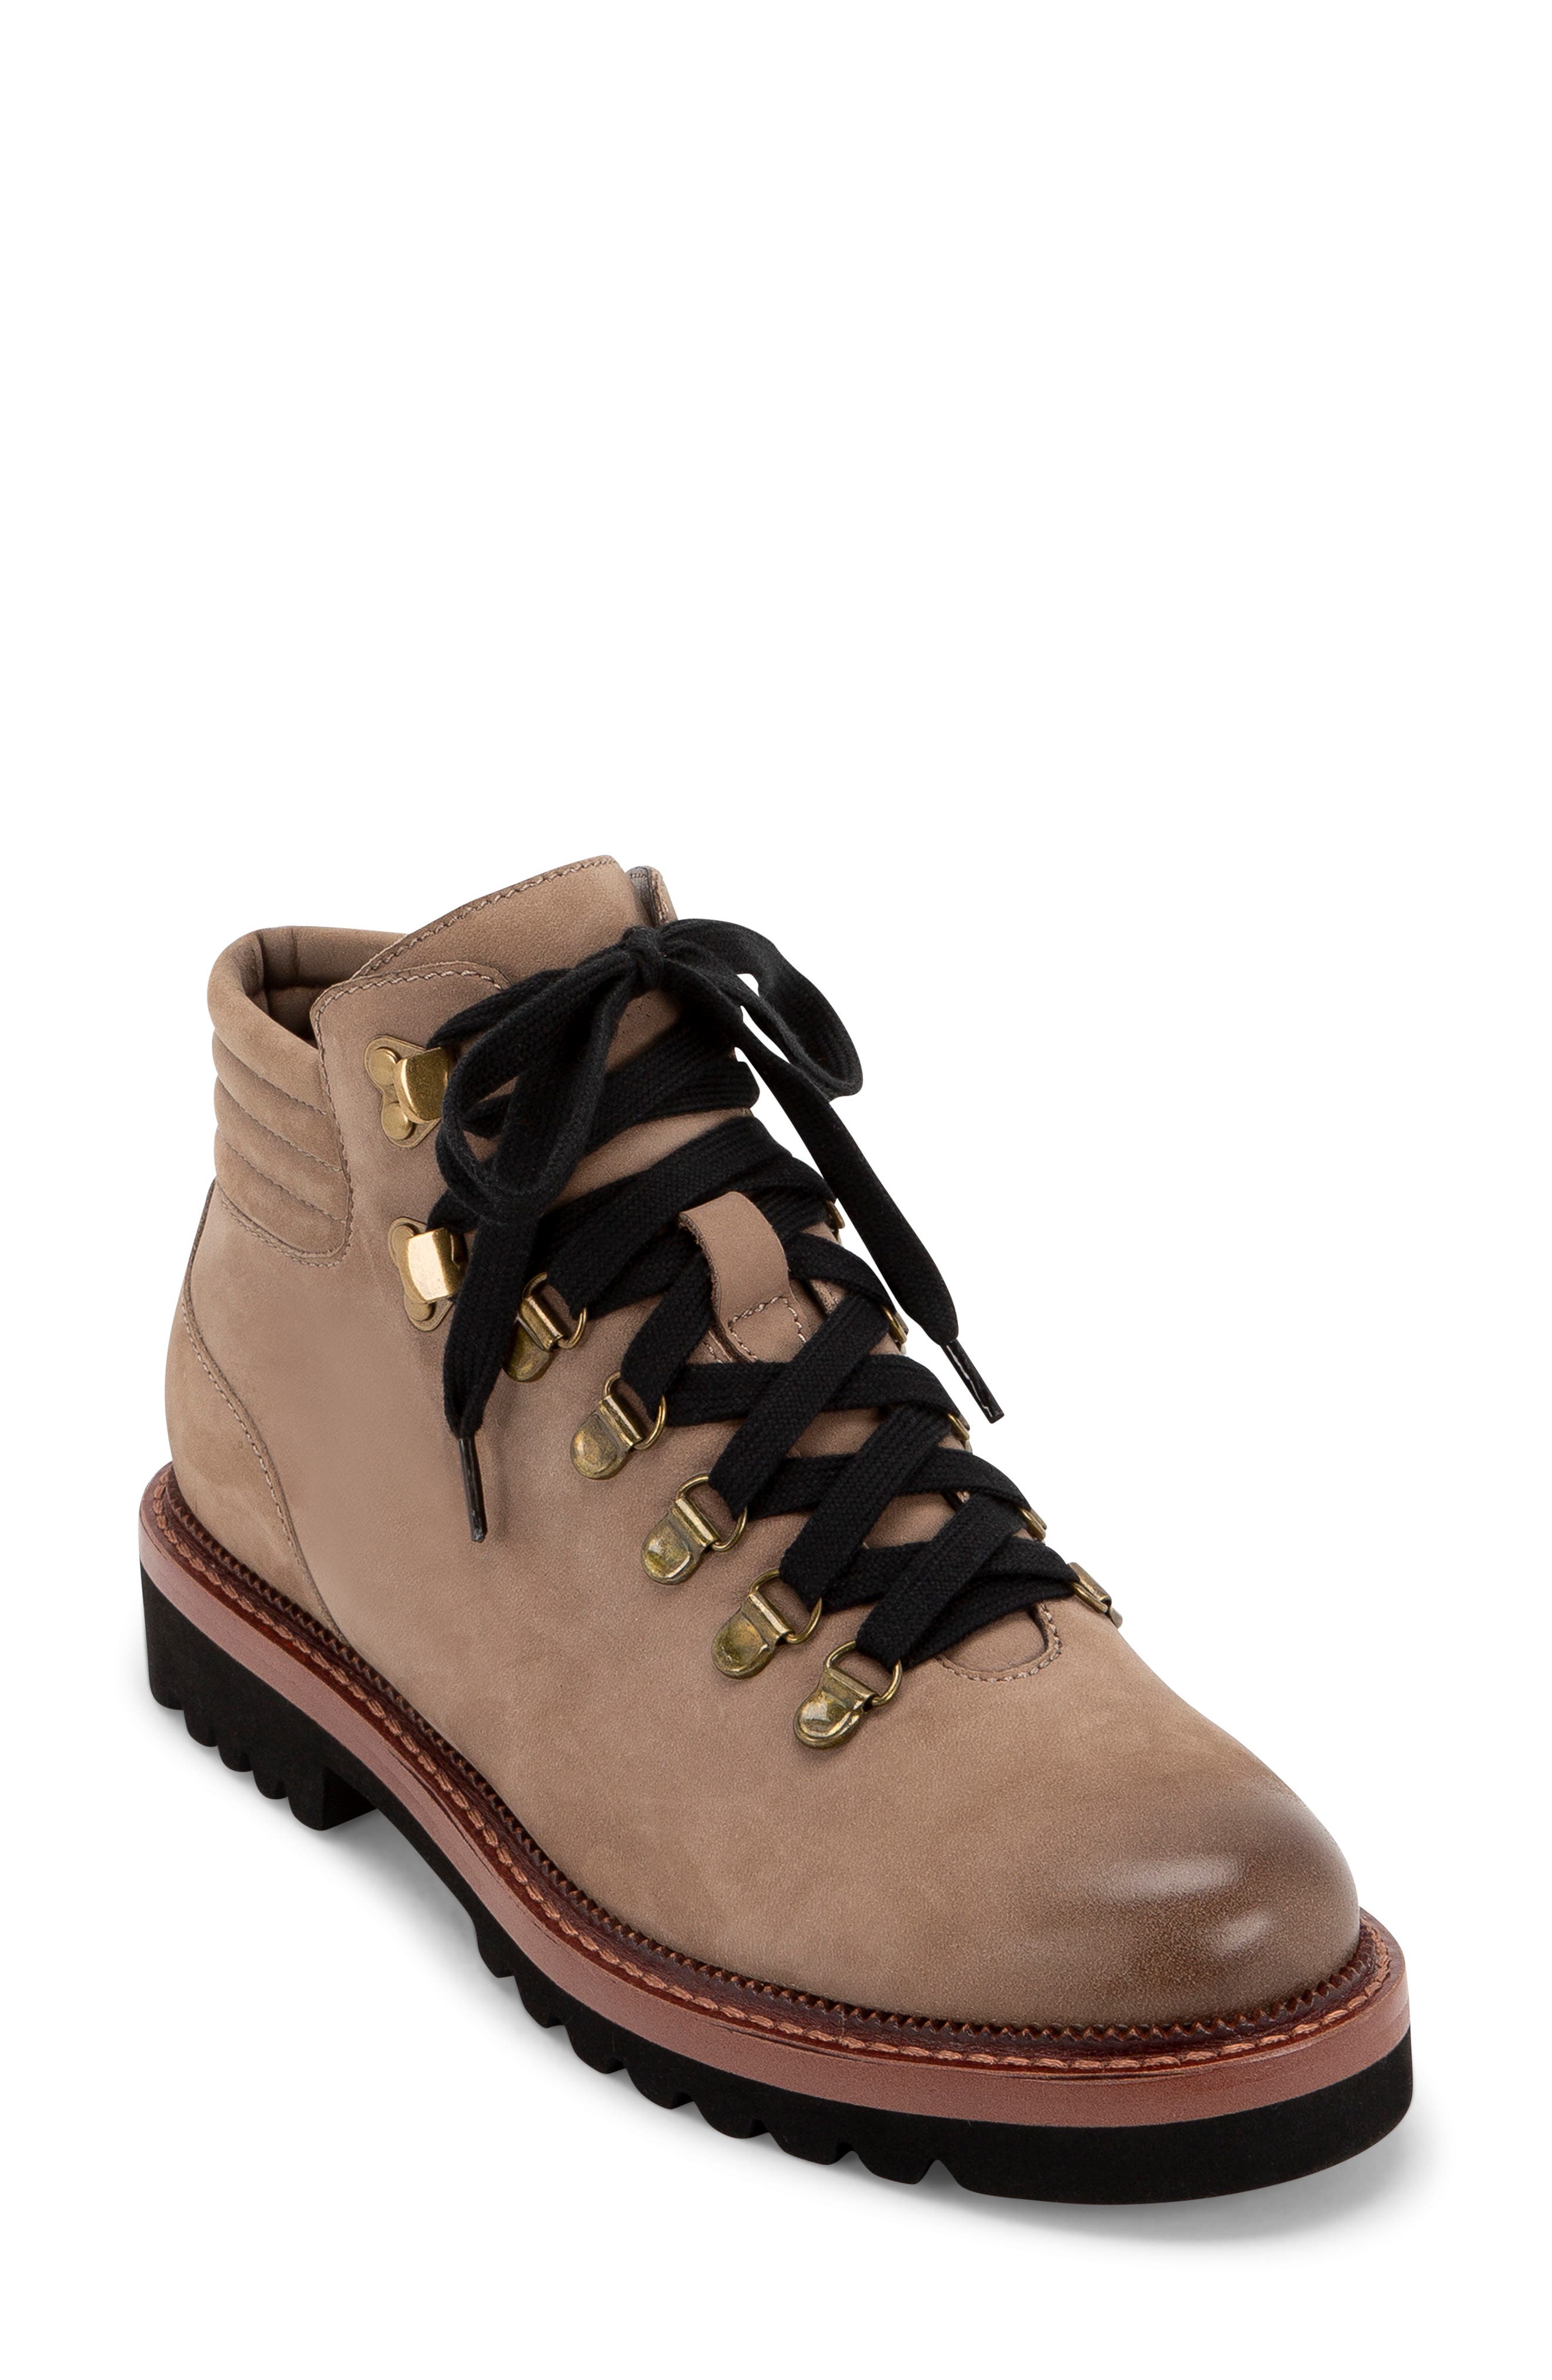 womens hiking boots nordstrom